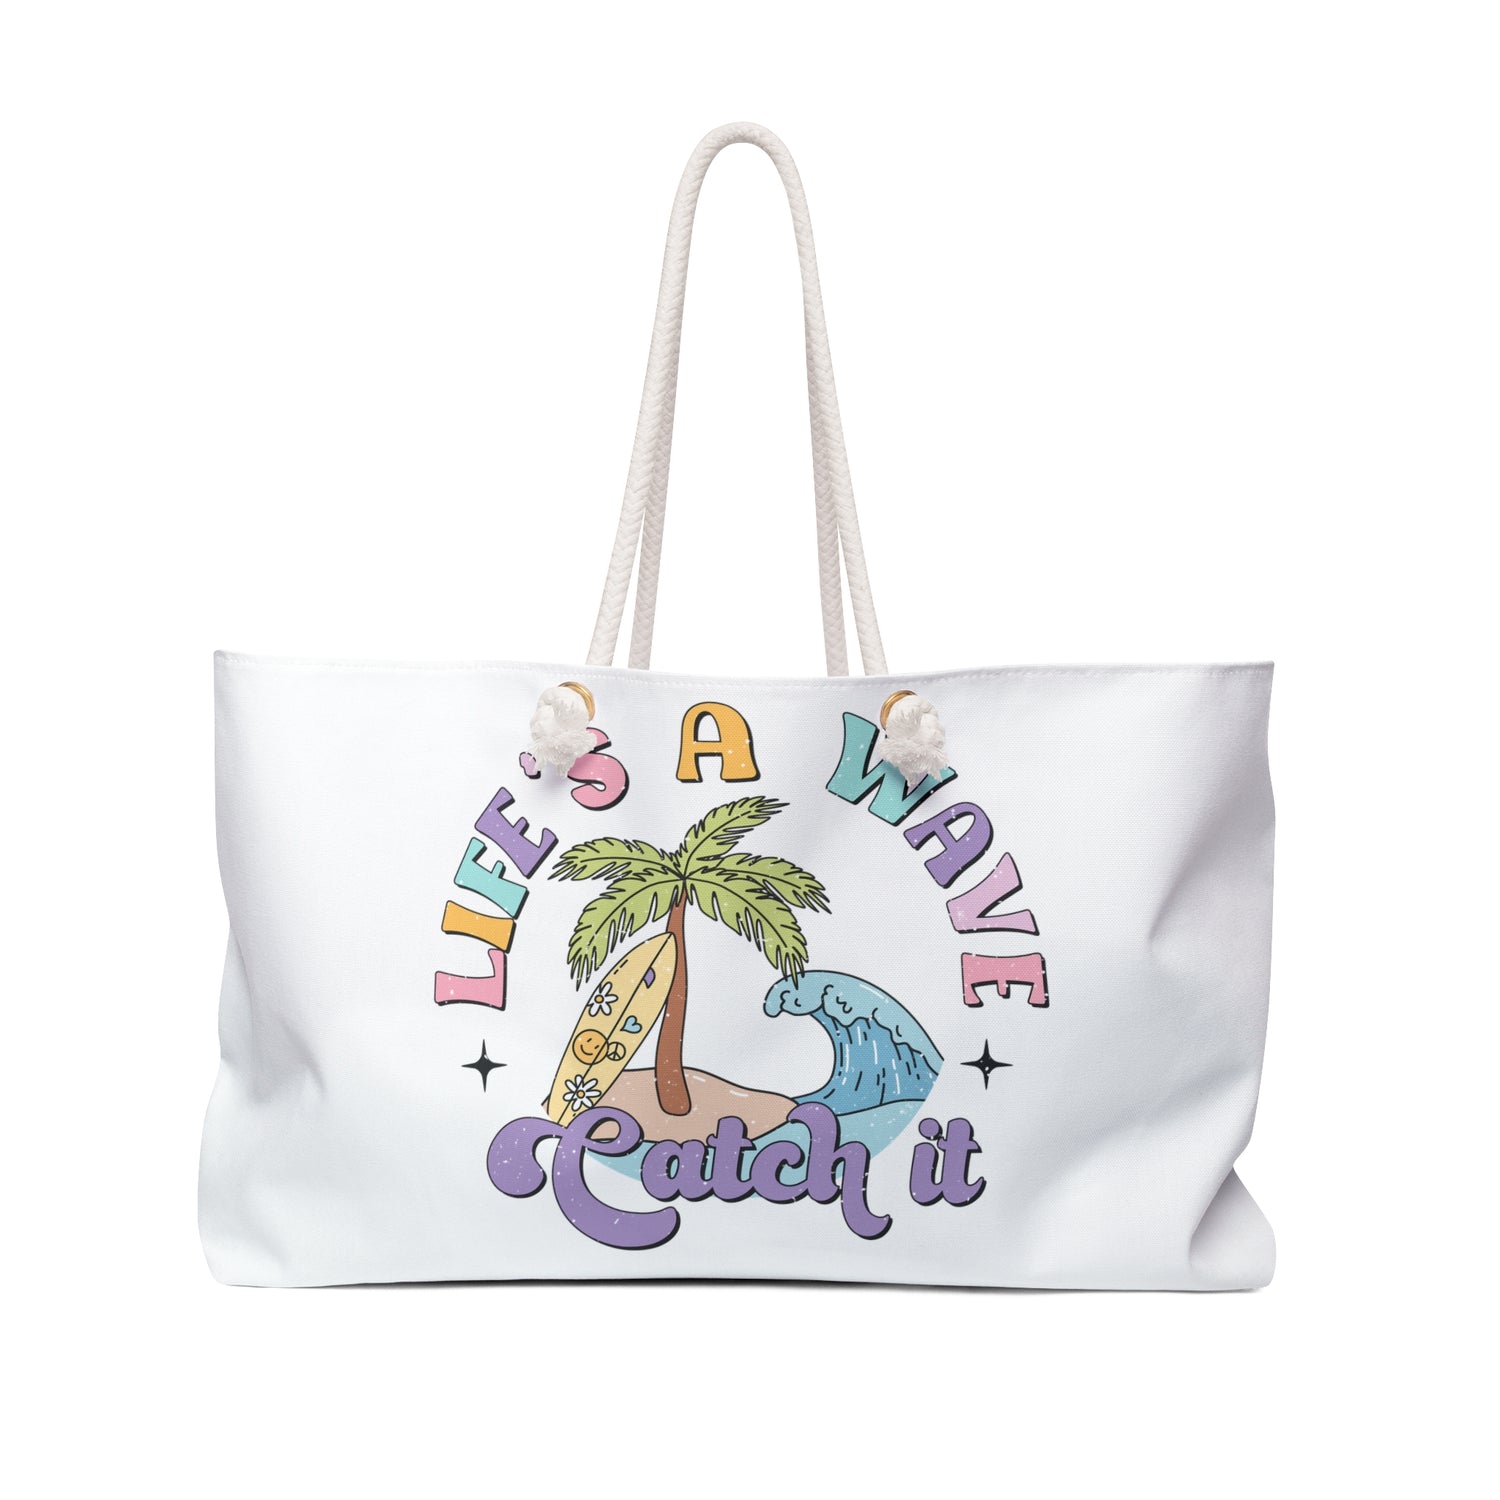 Embrace the retro vibe with our "Life's A Wave Catch It" premium weekender bag! This stylish bag features a vintage-inspired design perfect for beach trips, weekend getaways, or everyday adventures. 